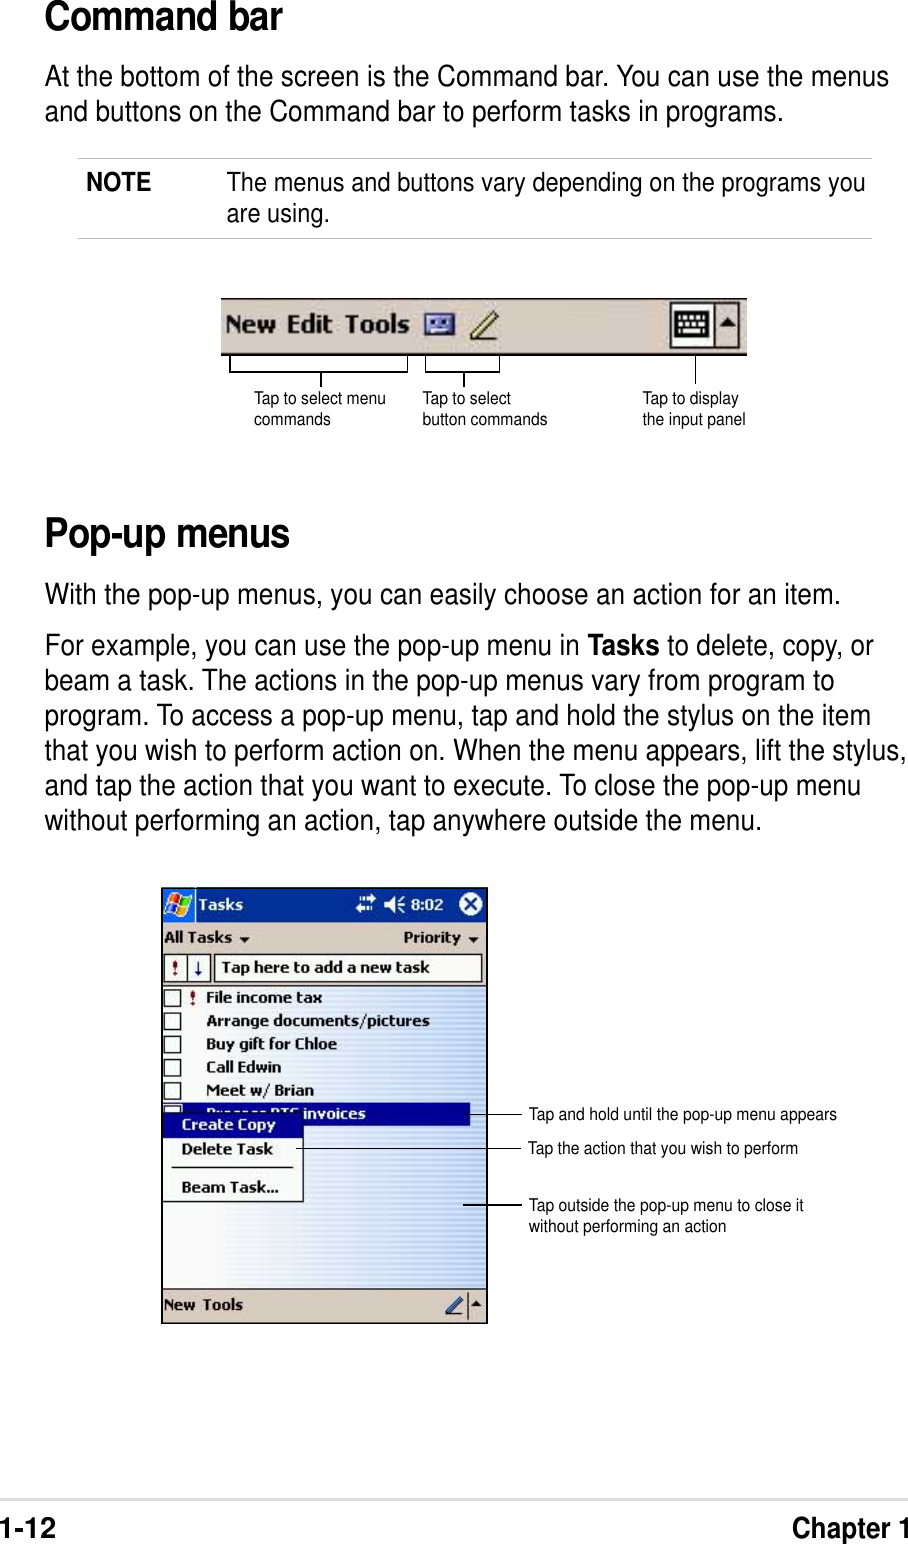 1-12Chapter 1Command barAt the bottom of the screen is the Command bar. You can use the menusand buttons on the Command bar to perform tasks in programs.NOTE The menus and buttons vary depending on the programs youare using.Tap to select menucommands Tap to selectbutton commands Tap to displaythe input panelPop-up menusWith the pop-up menus, you can easily choose an action for an item.For example, you can use the pop-up menu in Tasks to delete, copy, orbeam a task. The actions in the pop-up menus vary from program toprogram. To access a pop-up menu, tap and hold the stylus on the itemthat you wish to perform action on. When the menu appears, lift the stylus,and tap the action that you want to execute. To close the pop-up menuwithout performing an action, tap anywhere outside the menu.Tap and hold until the pop-up menu appearsTap the action that you wish to performTap outside the pop-up menu to close itwithout performing an action